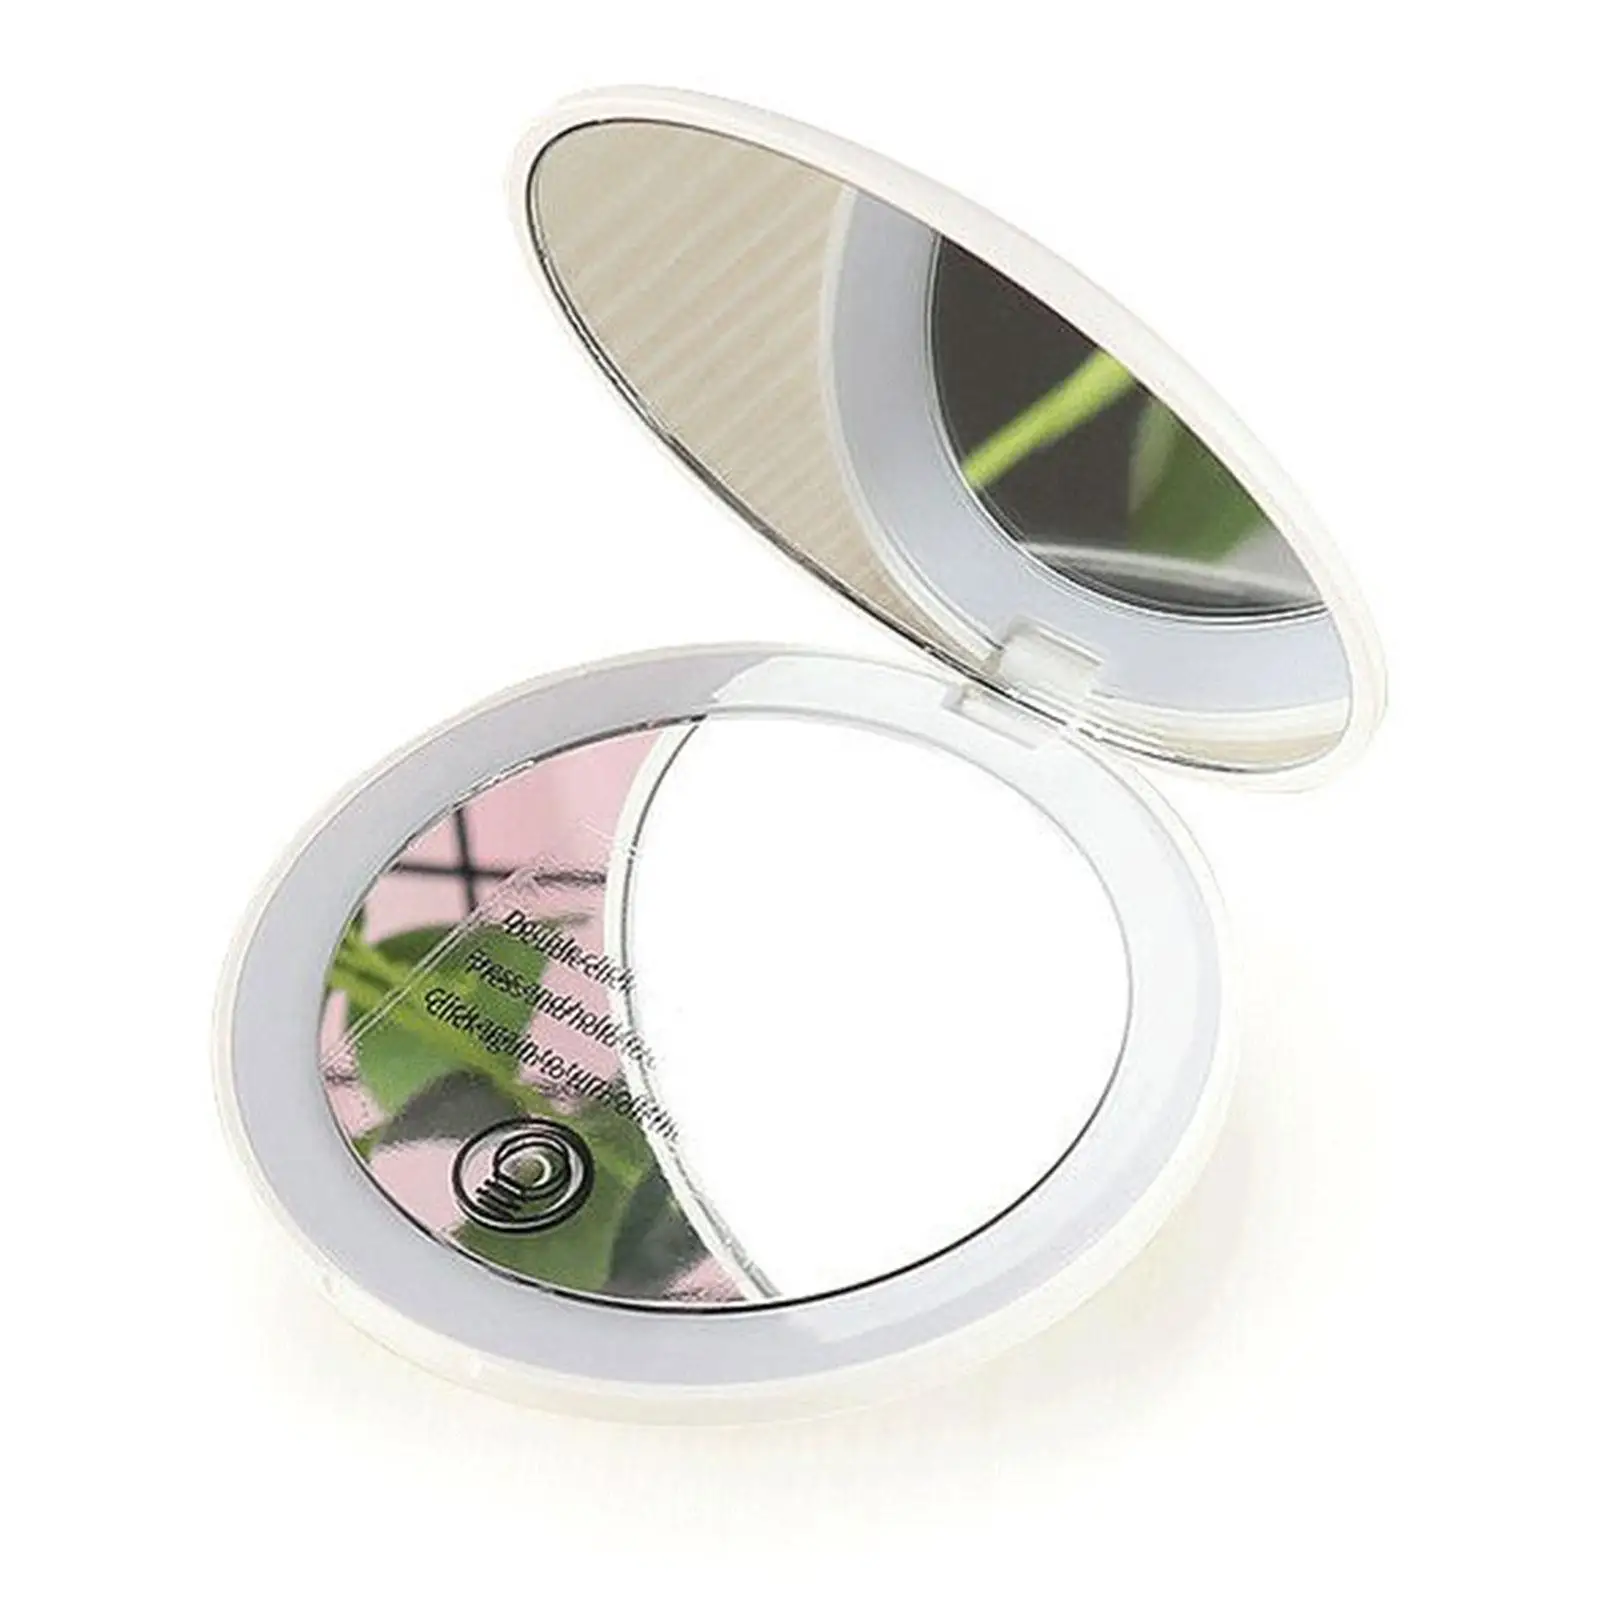 Handheld Makeup Mirror 2x Magnification Dimmable Rechargeable LED Compact Mirror for Travel Pocket Handbag Purse ValentineS Day